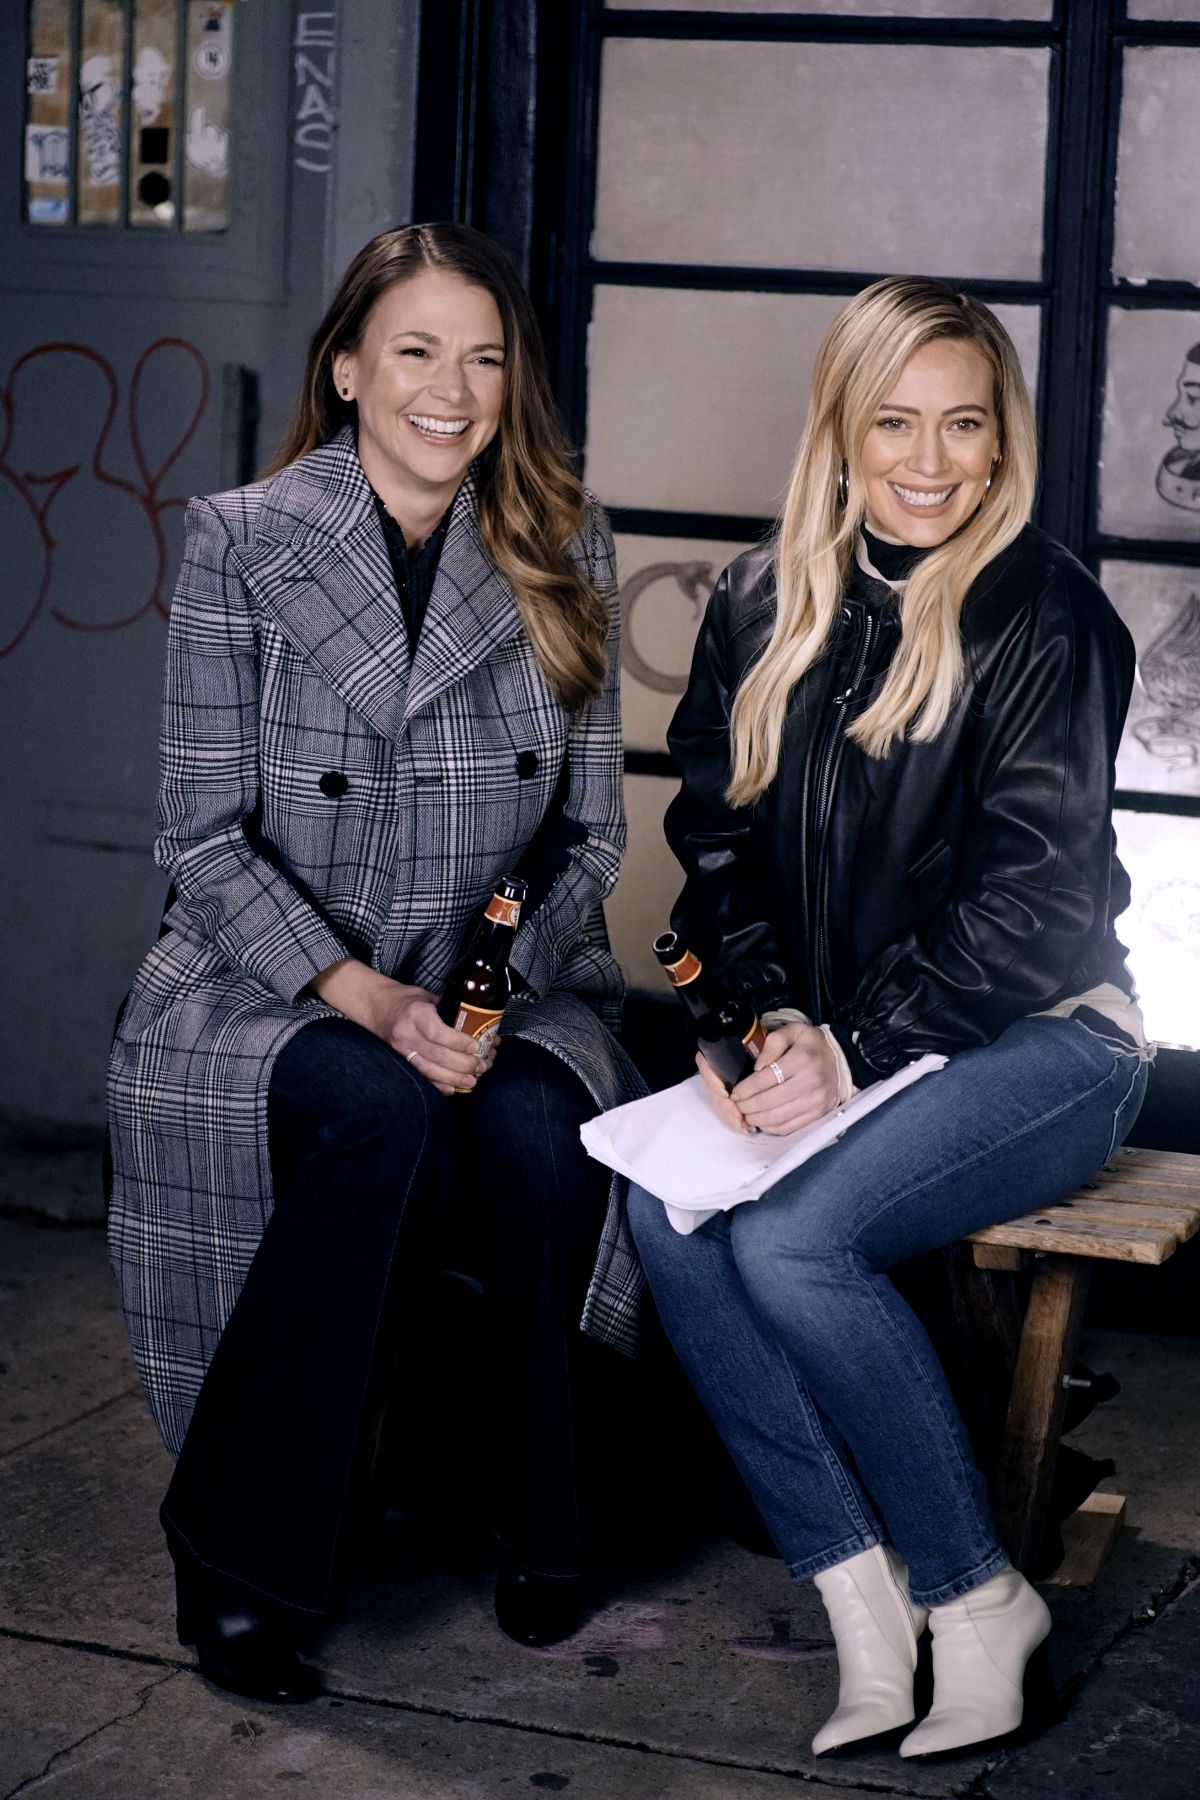 hilary-duff-and-sutton-foster-on-the-set-of-younger-in-new-york-12-11-2020-4.jpg